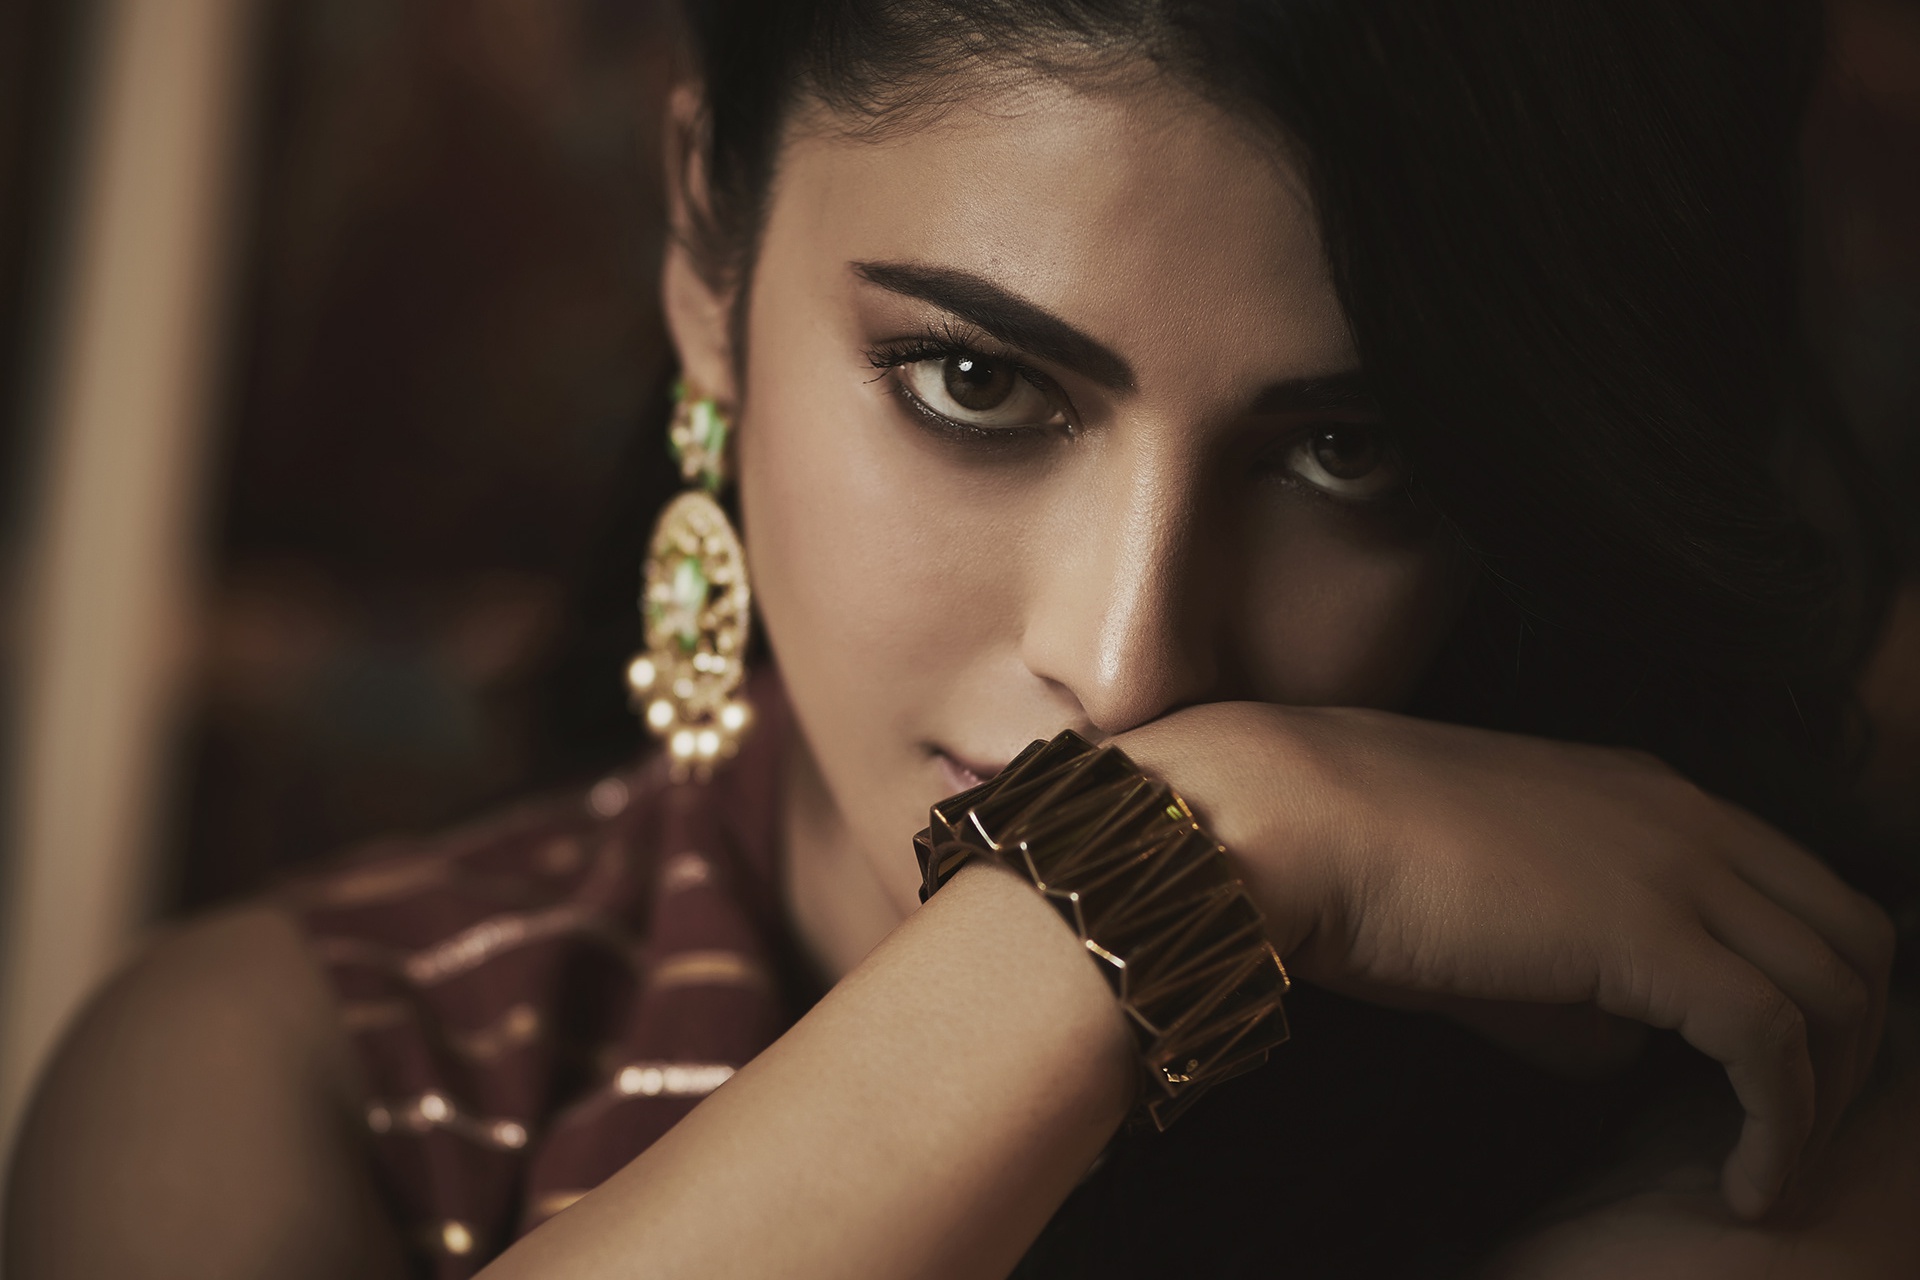 shruti haasan, bollywood, celebrity, actress, brown eyes, earrings, face, indian, stare